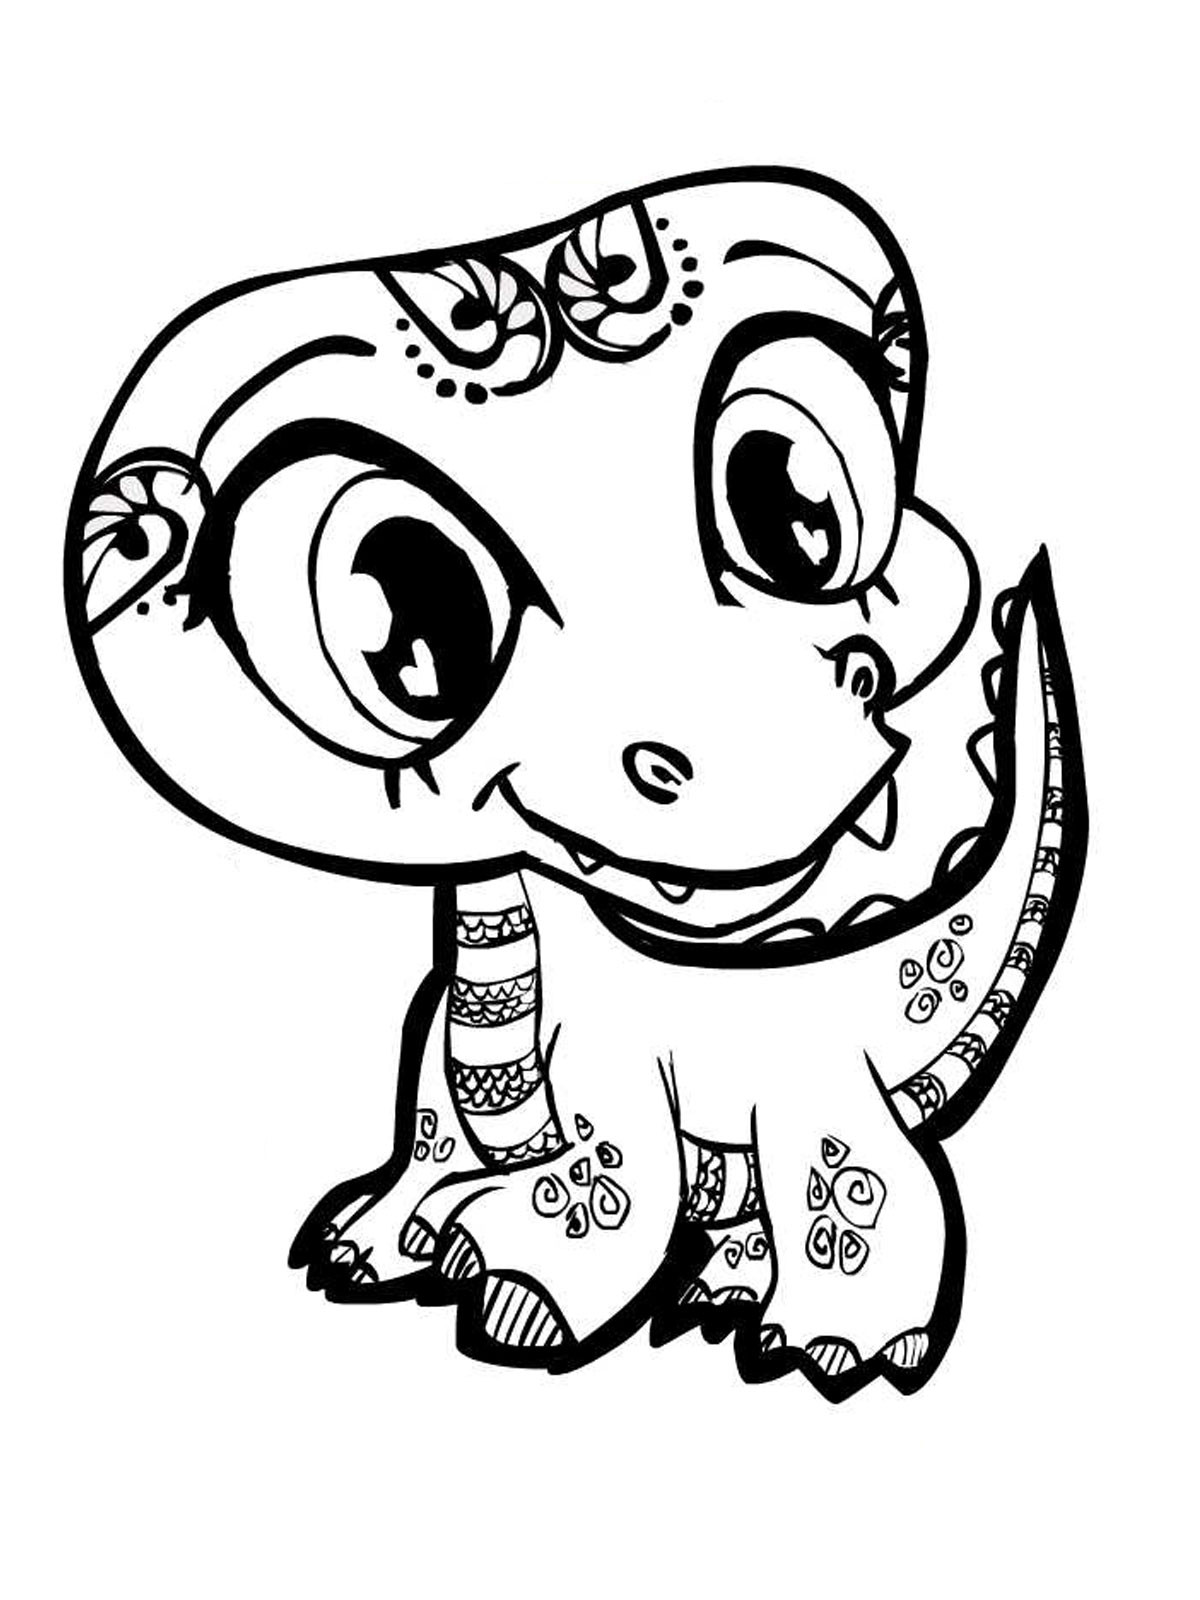 Cut Coloring Pages
 Cute Animal Coloring Pages Printables Cute Animal Coloring